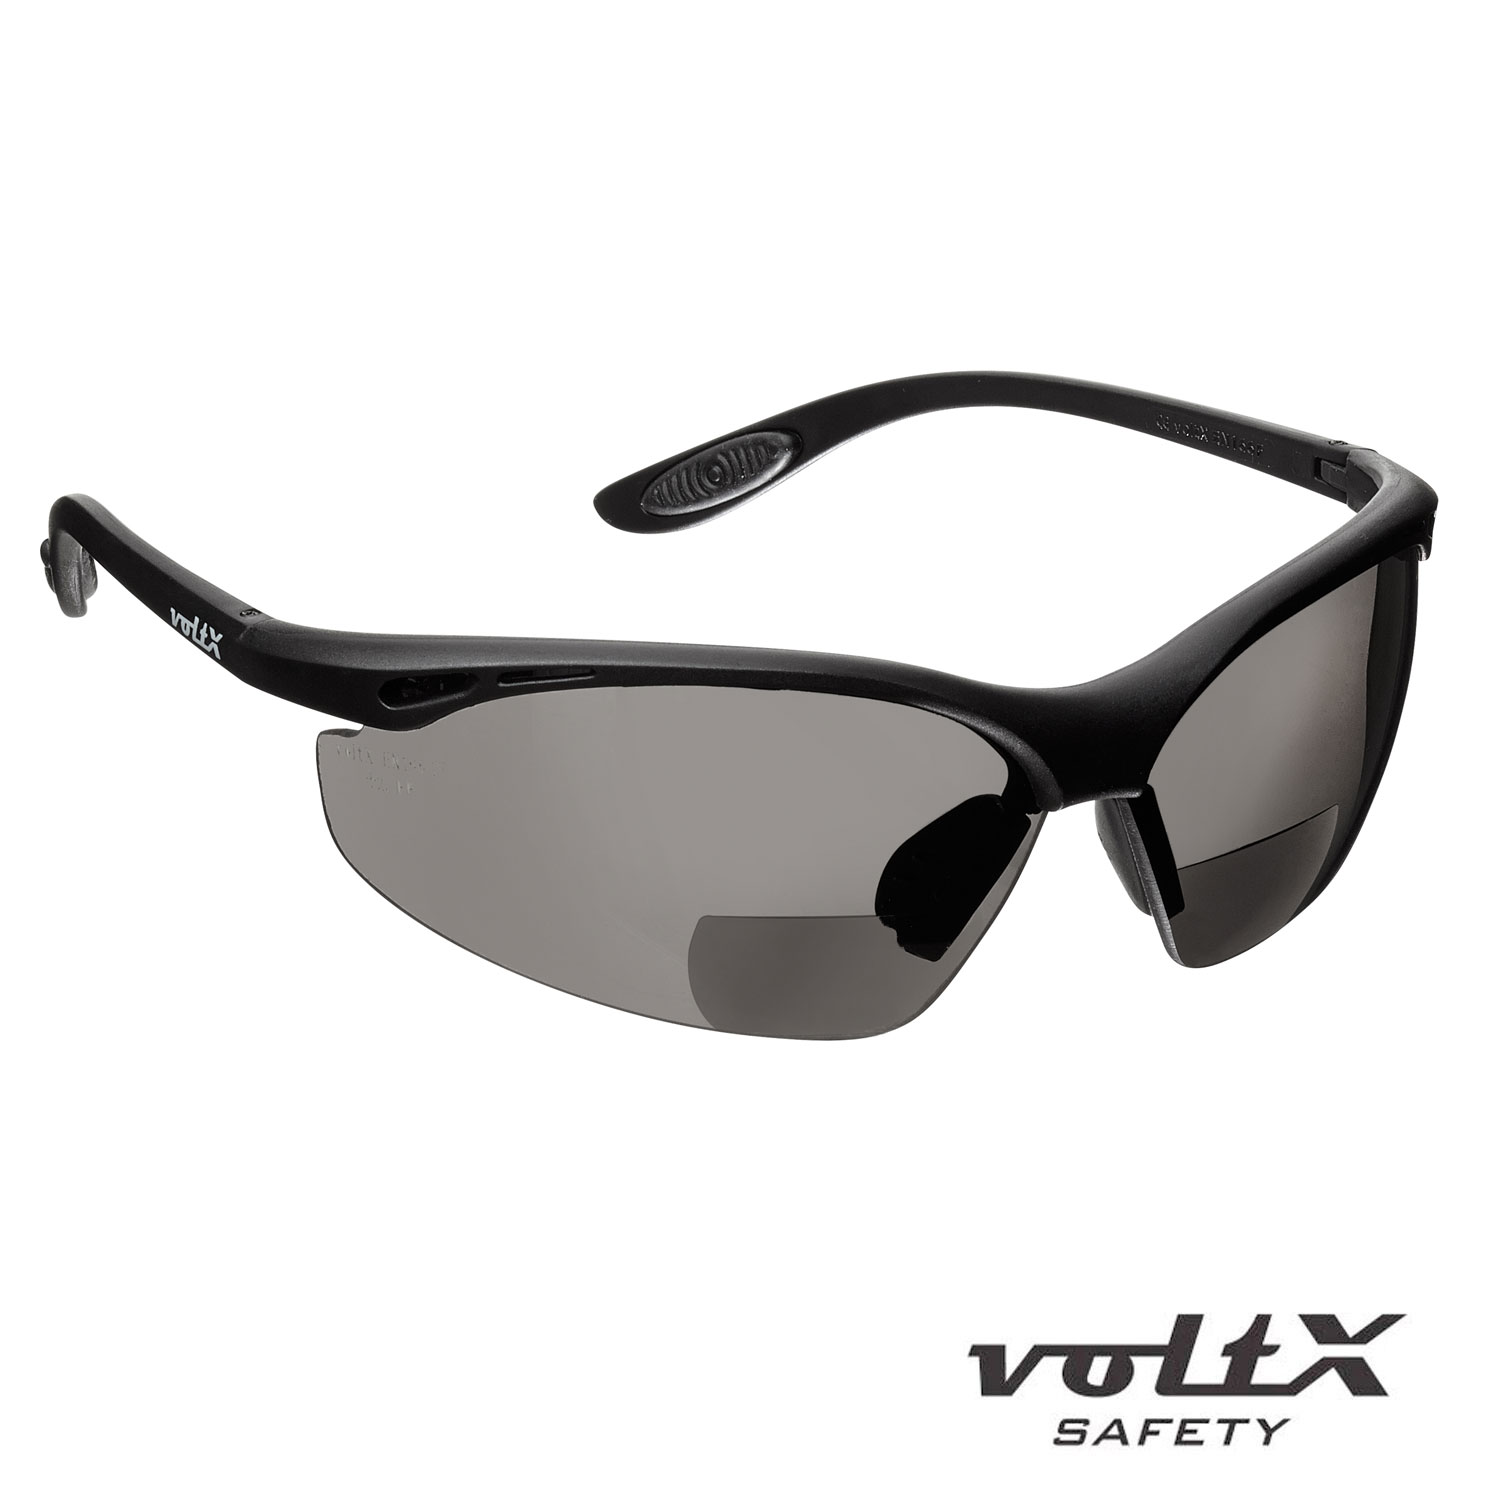 voltX GRAFTER Bifocal Lightweight Reading Safety Glasses YELLOW LENS 2.5 Sports 